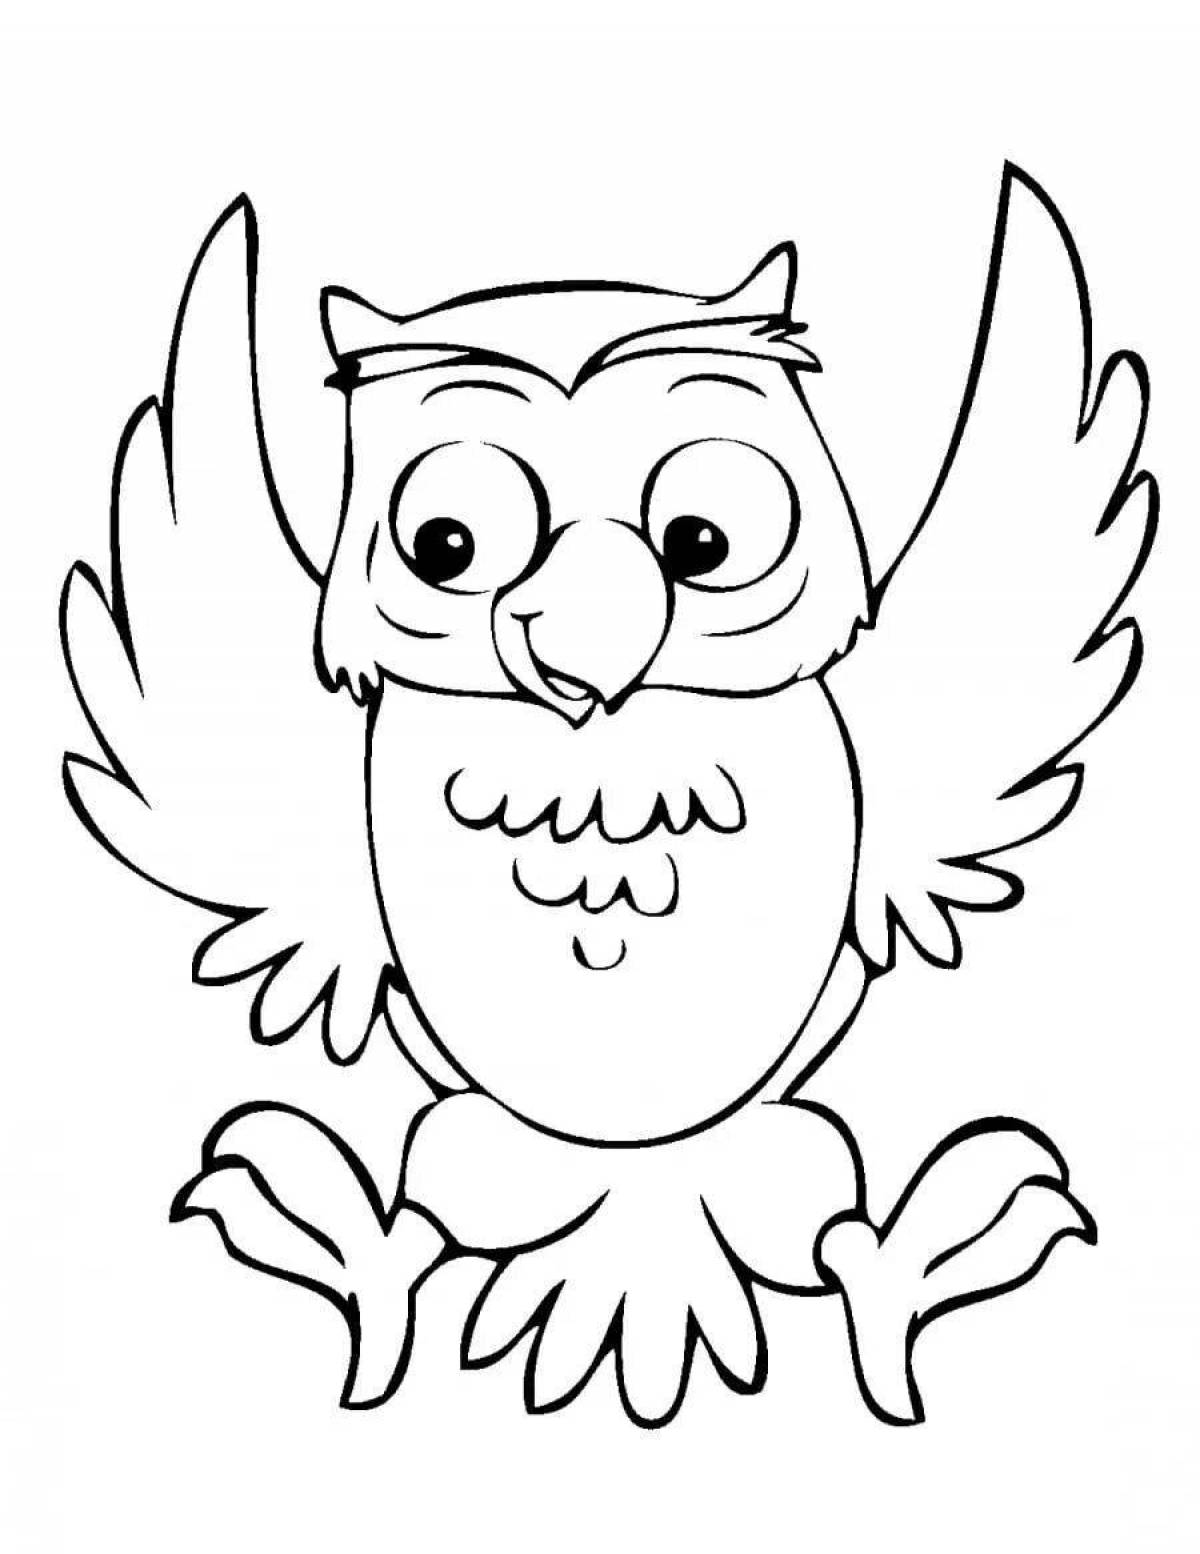 Owl picture #10